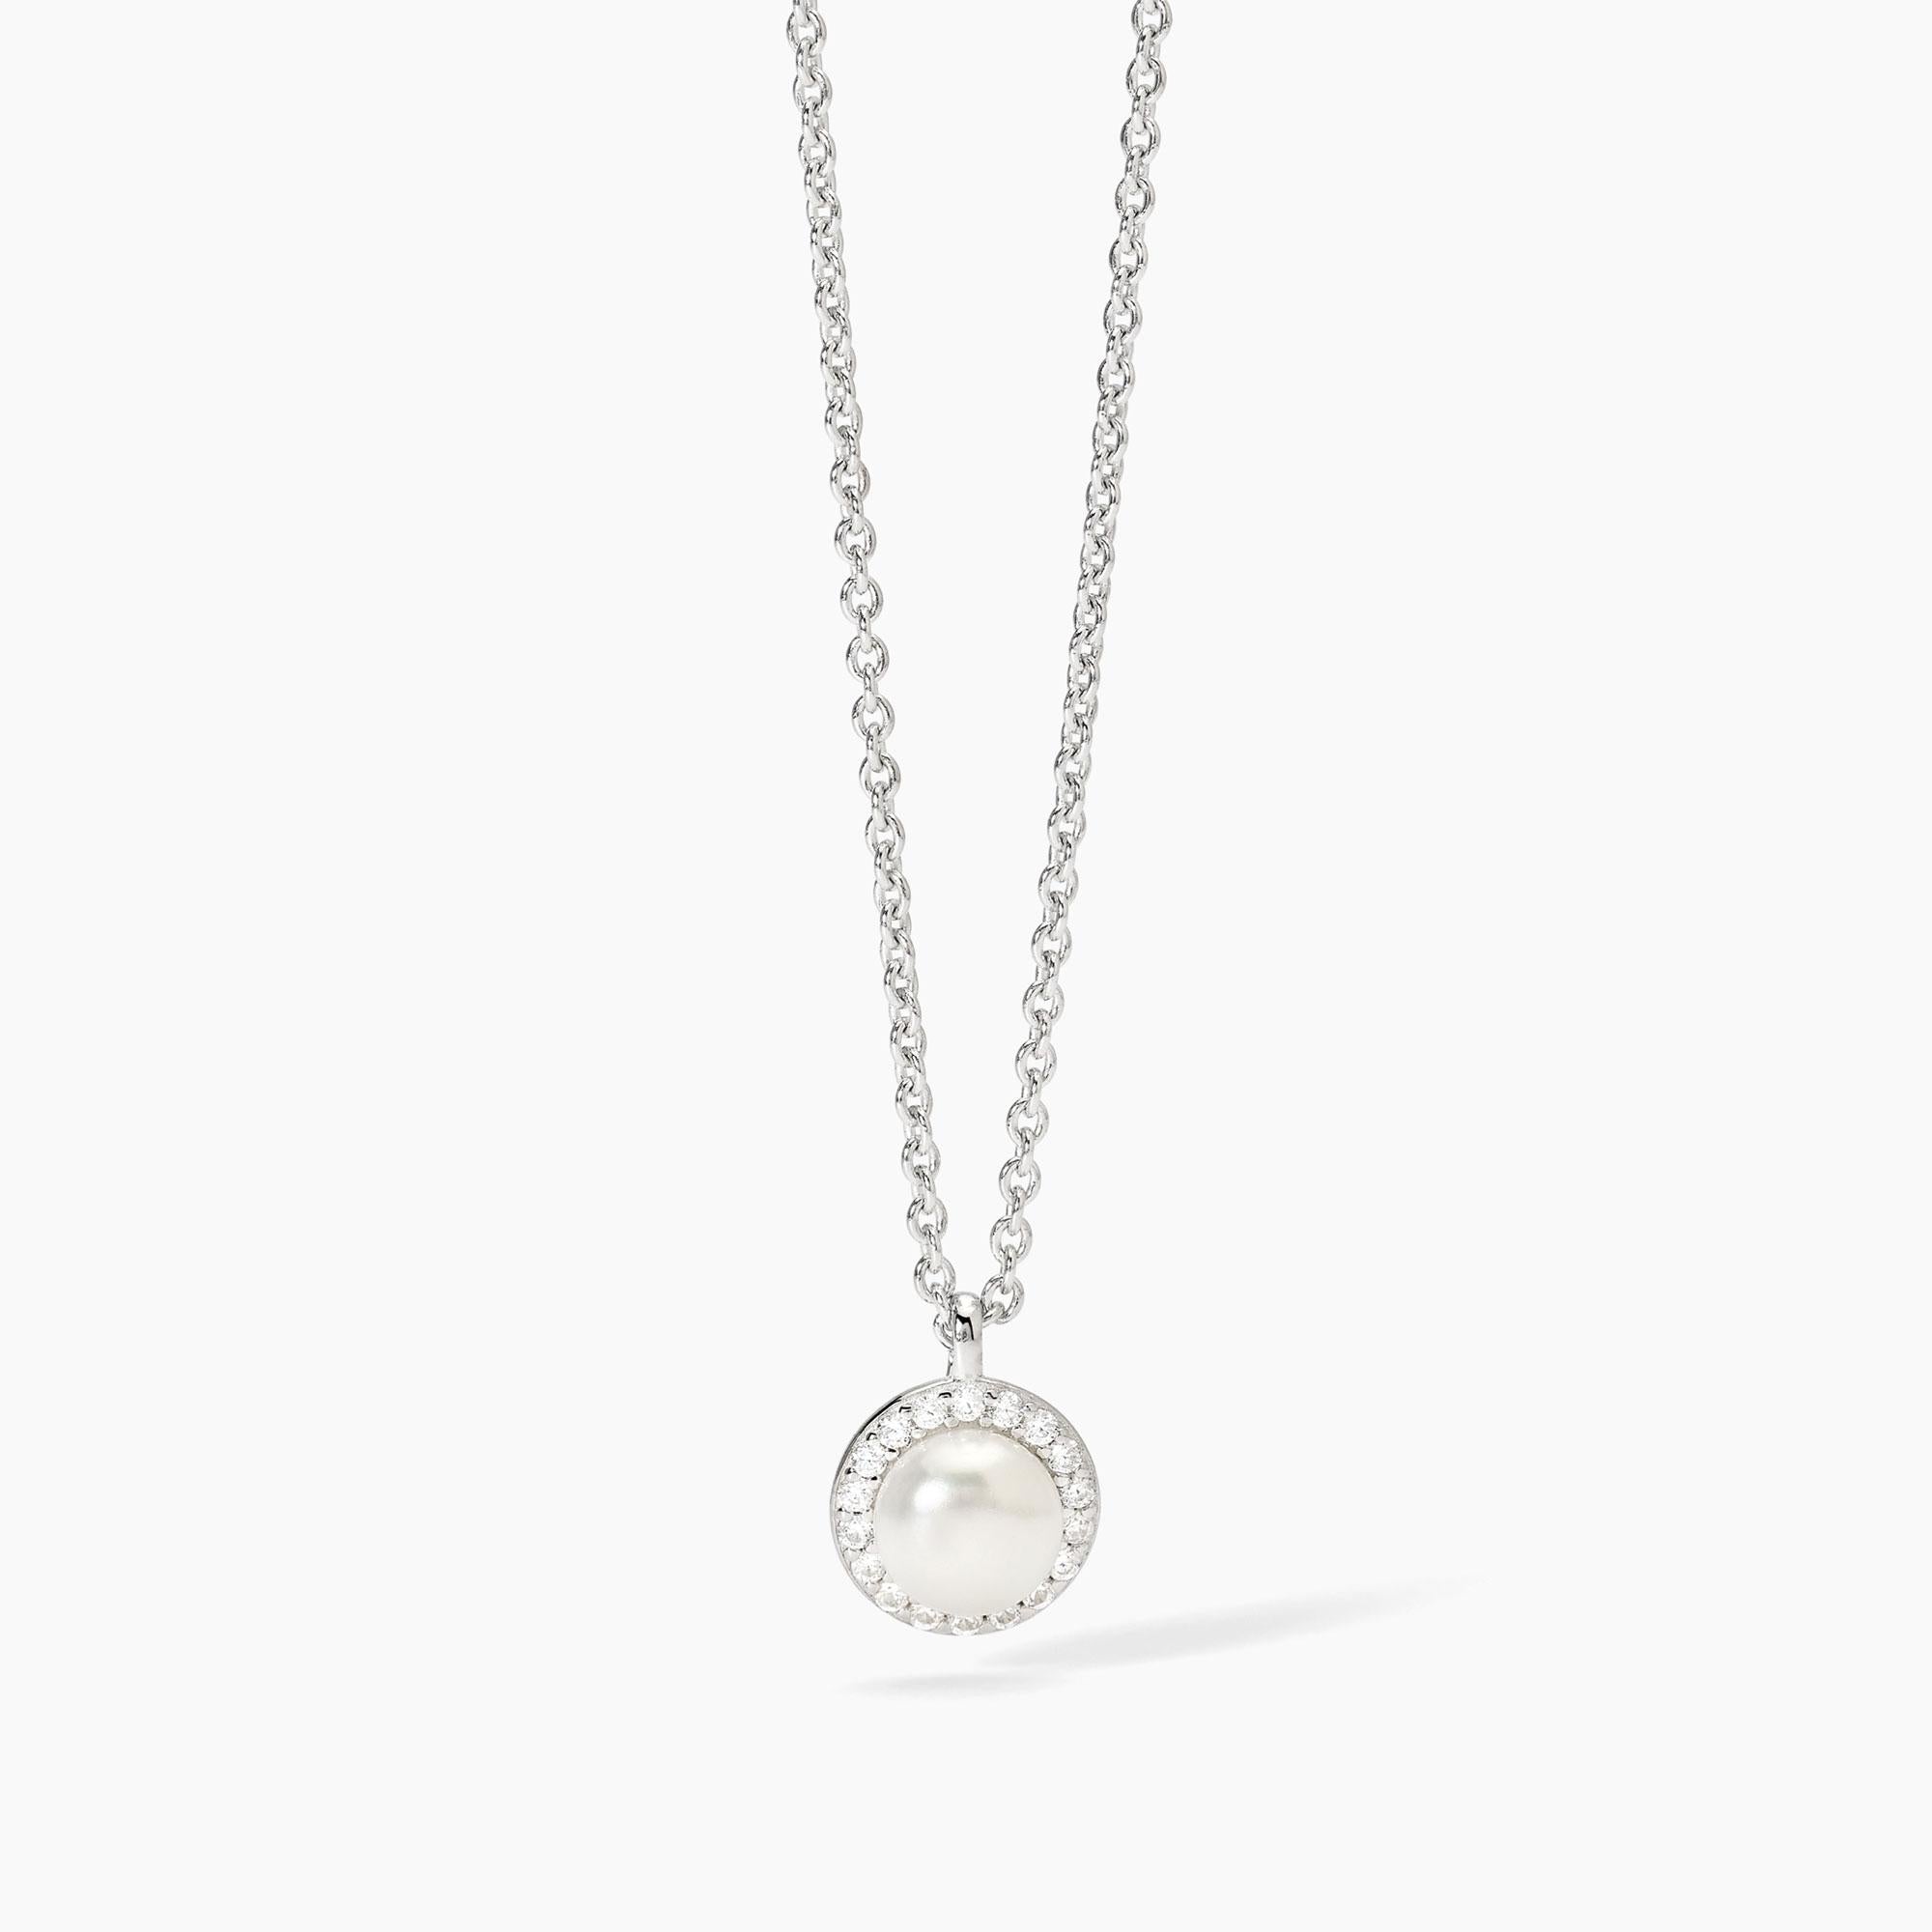 Mabina Woman - Silver necklace with cultured pearl and zircons MILANESIENNE - 553674